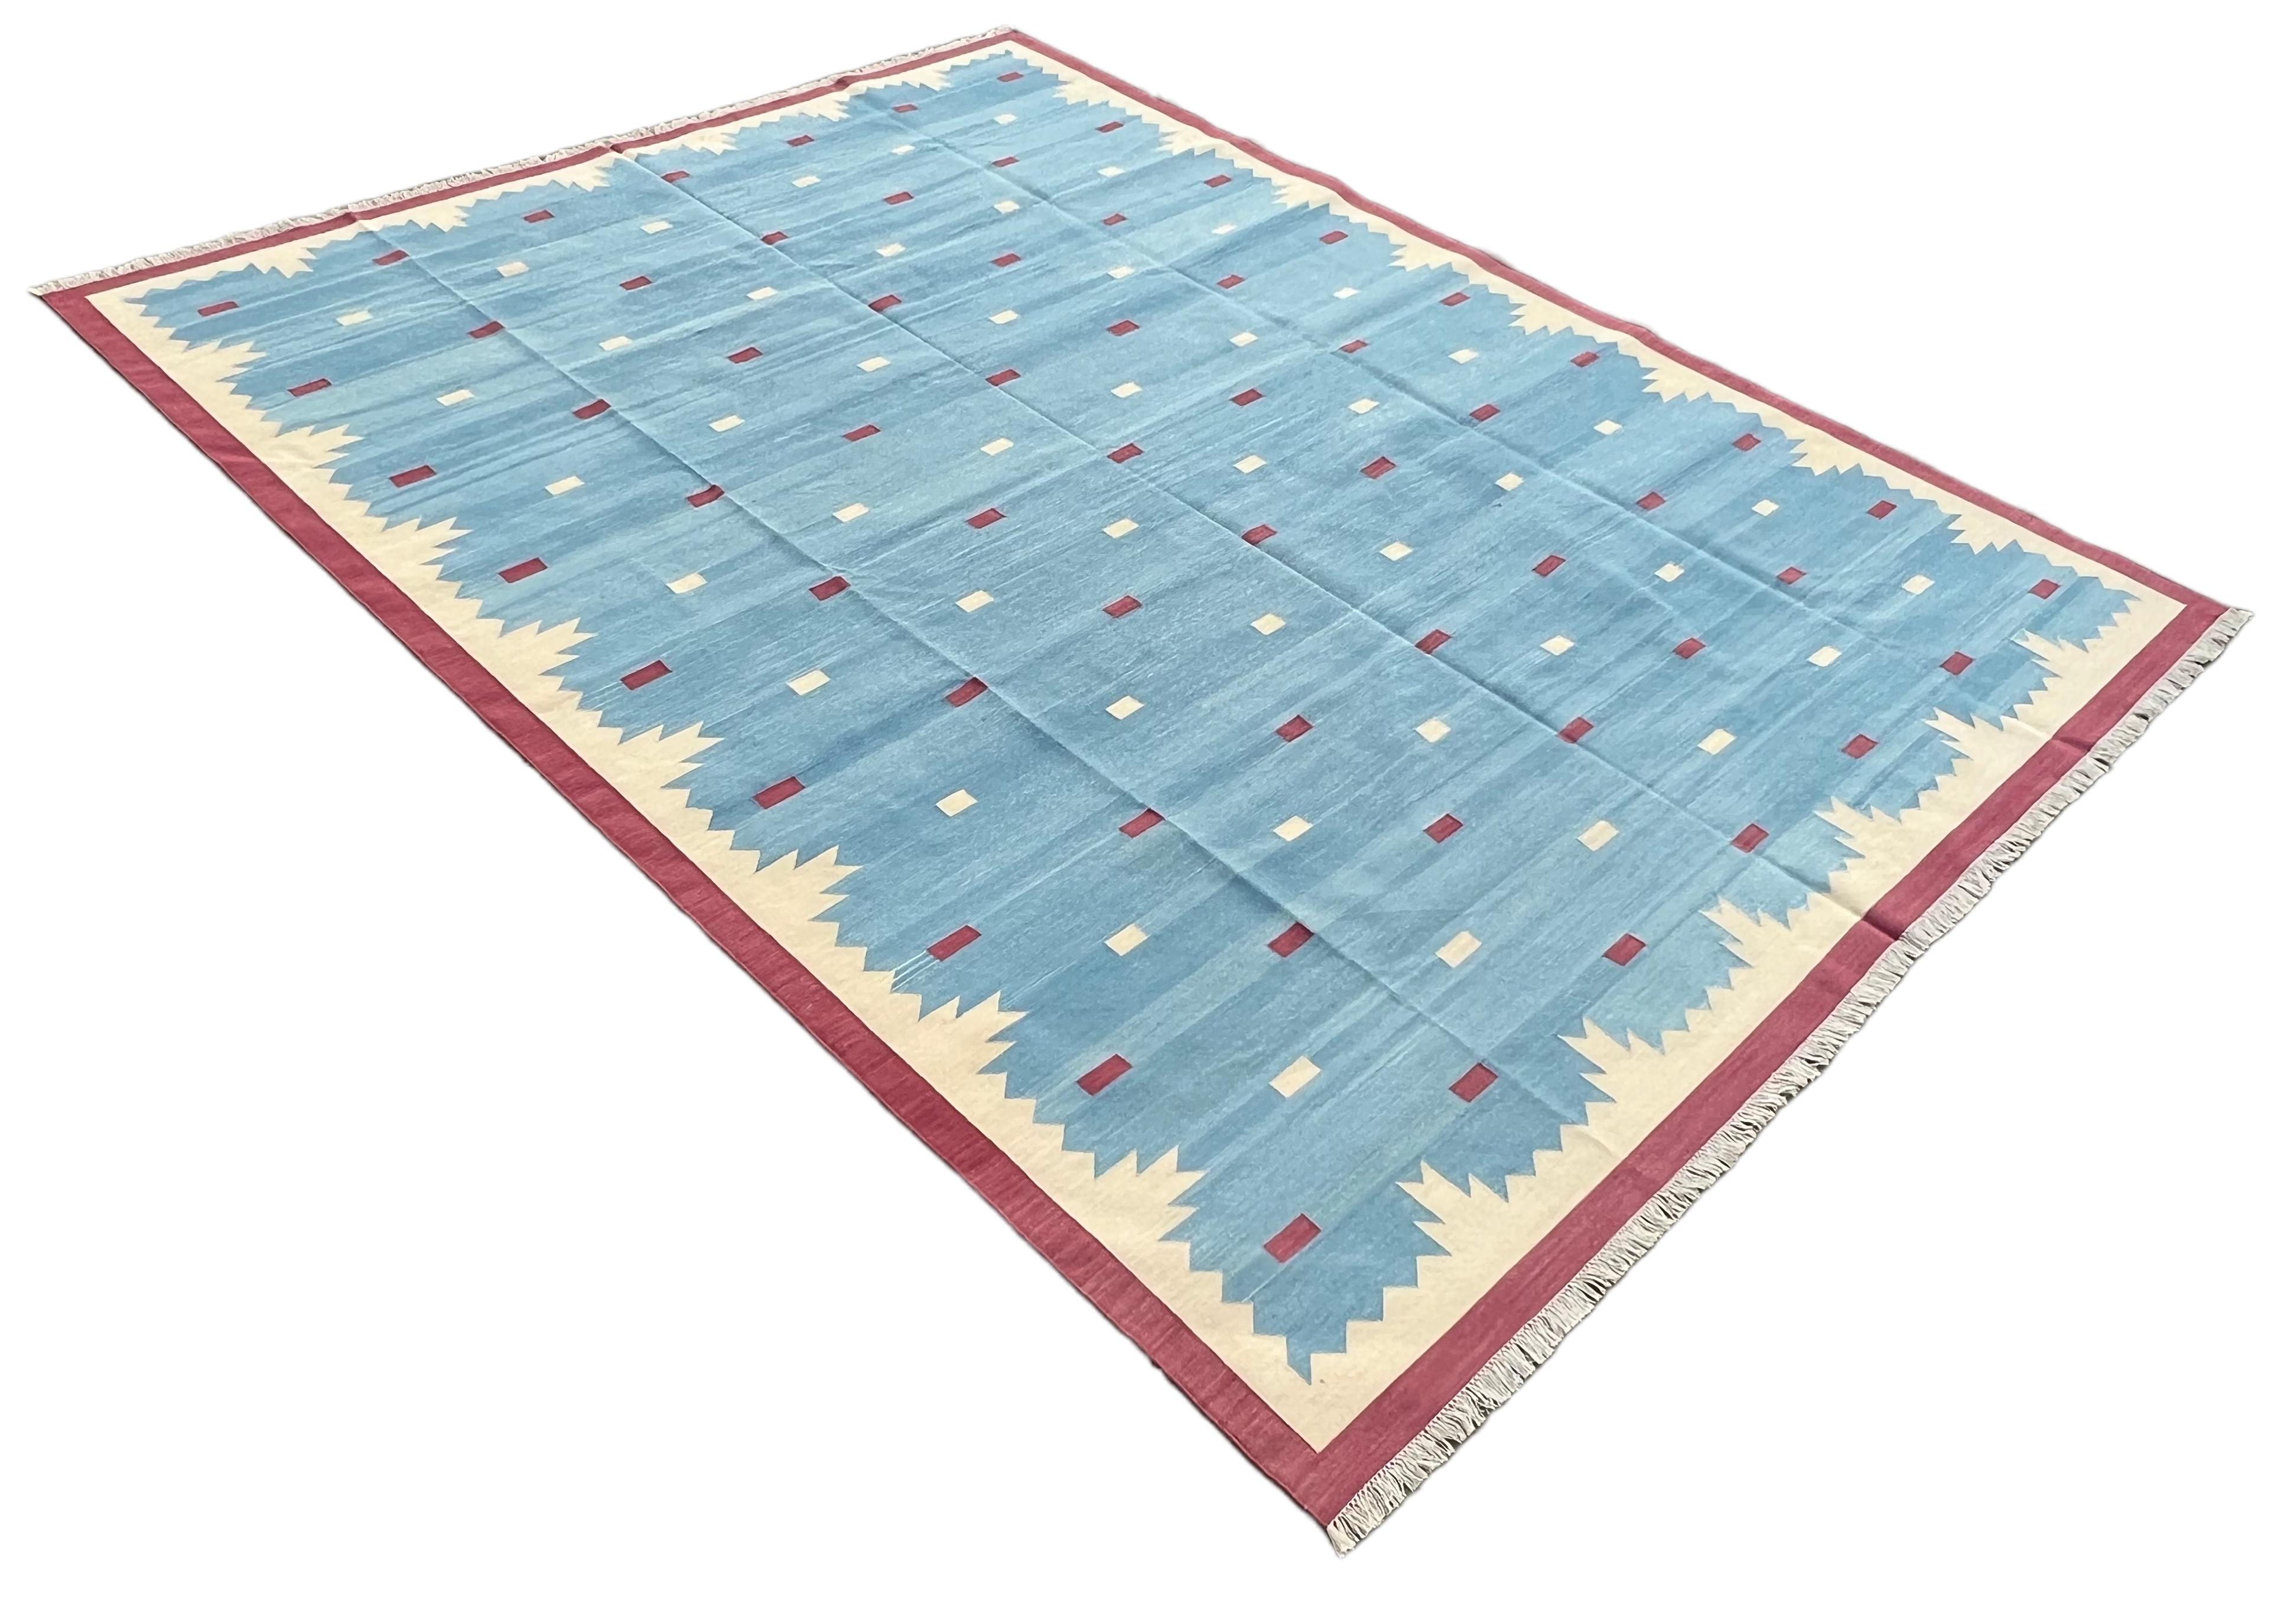 Cotton Vegetable Dyed Reversible Sky Blue And Pink Geometric Patterned Indian Rug - 9'x12'
These special flat-weave dhurries are hand-woven with 15 ply 100% cotton yarn. Due to the special manufacturing techniques used to create our rugs, the size